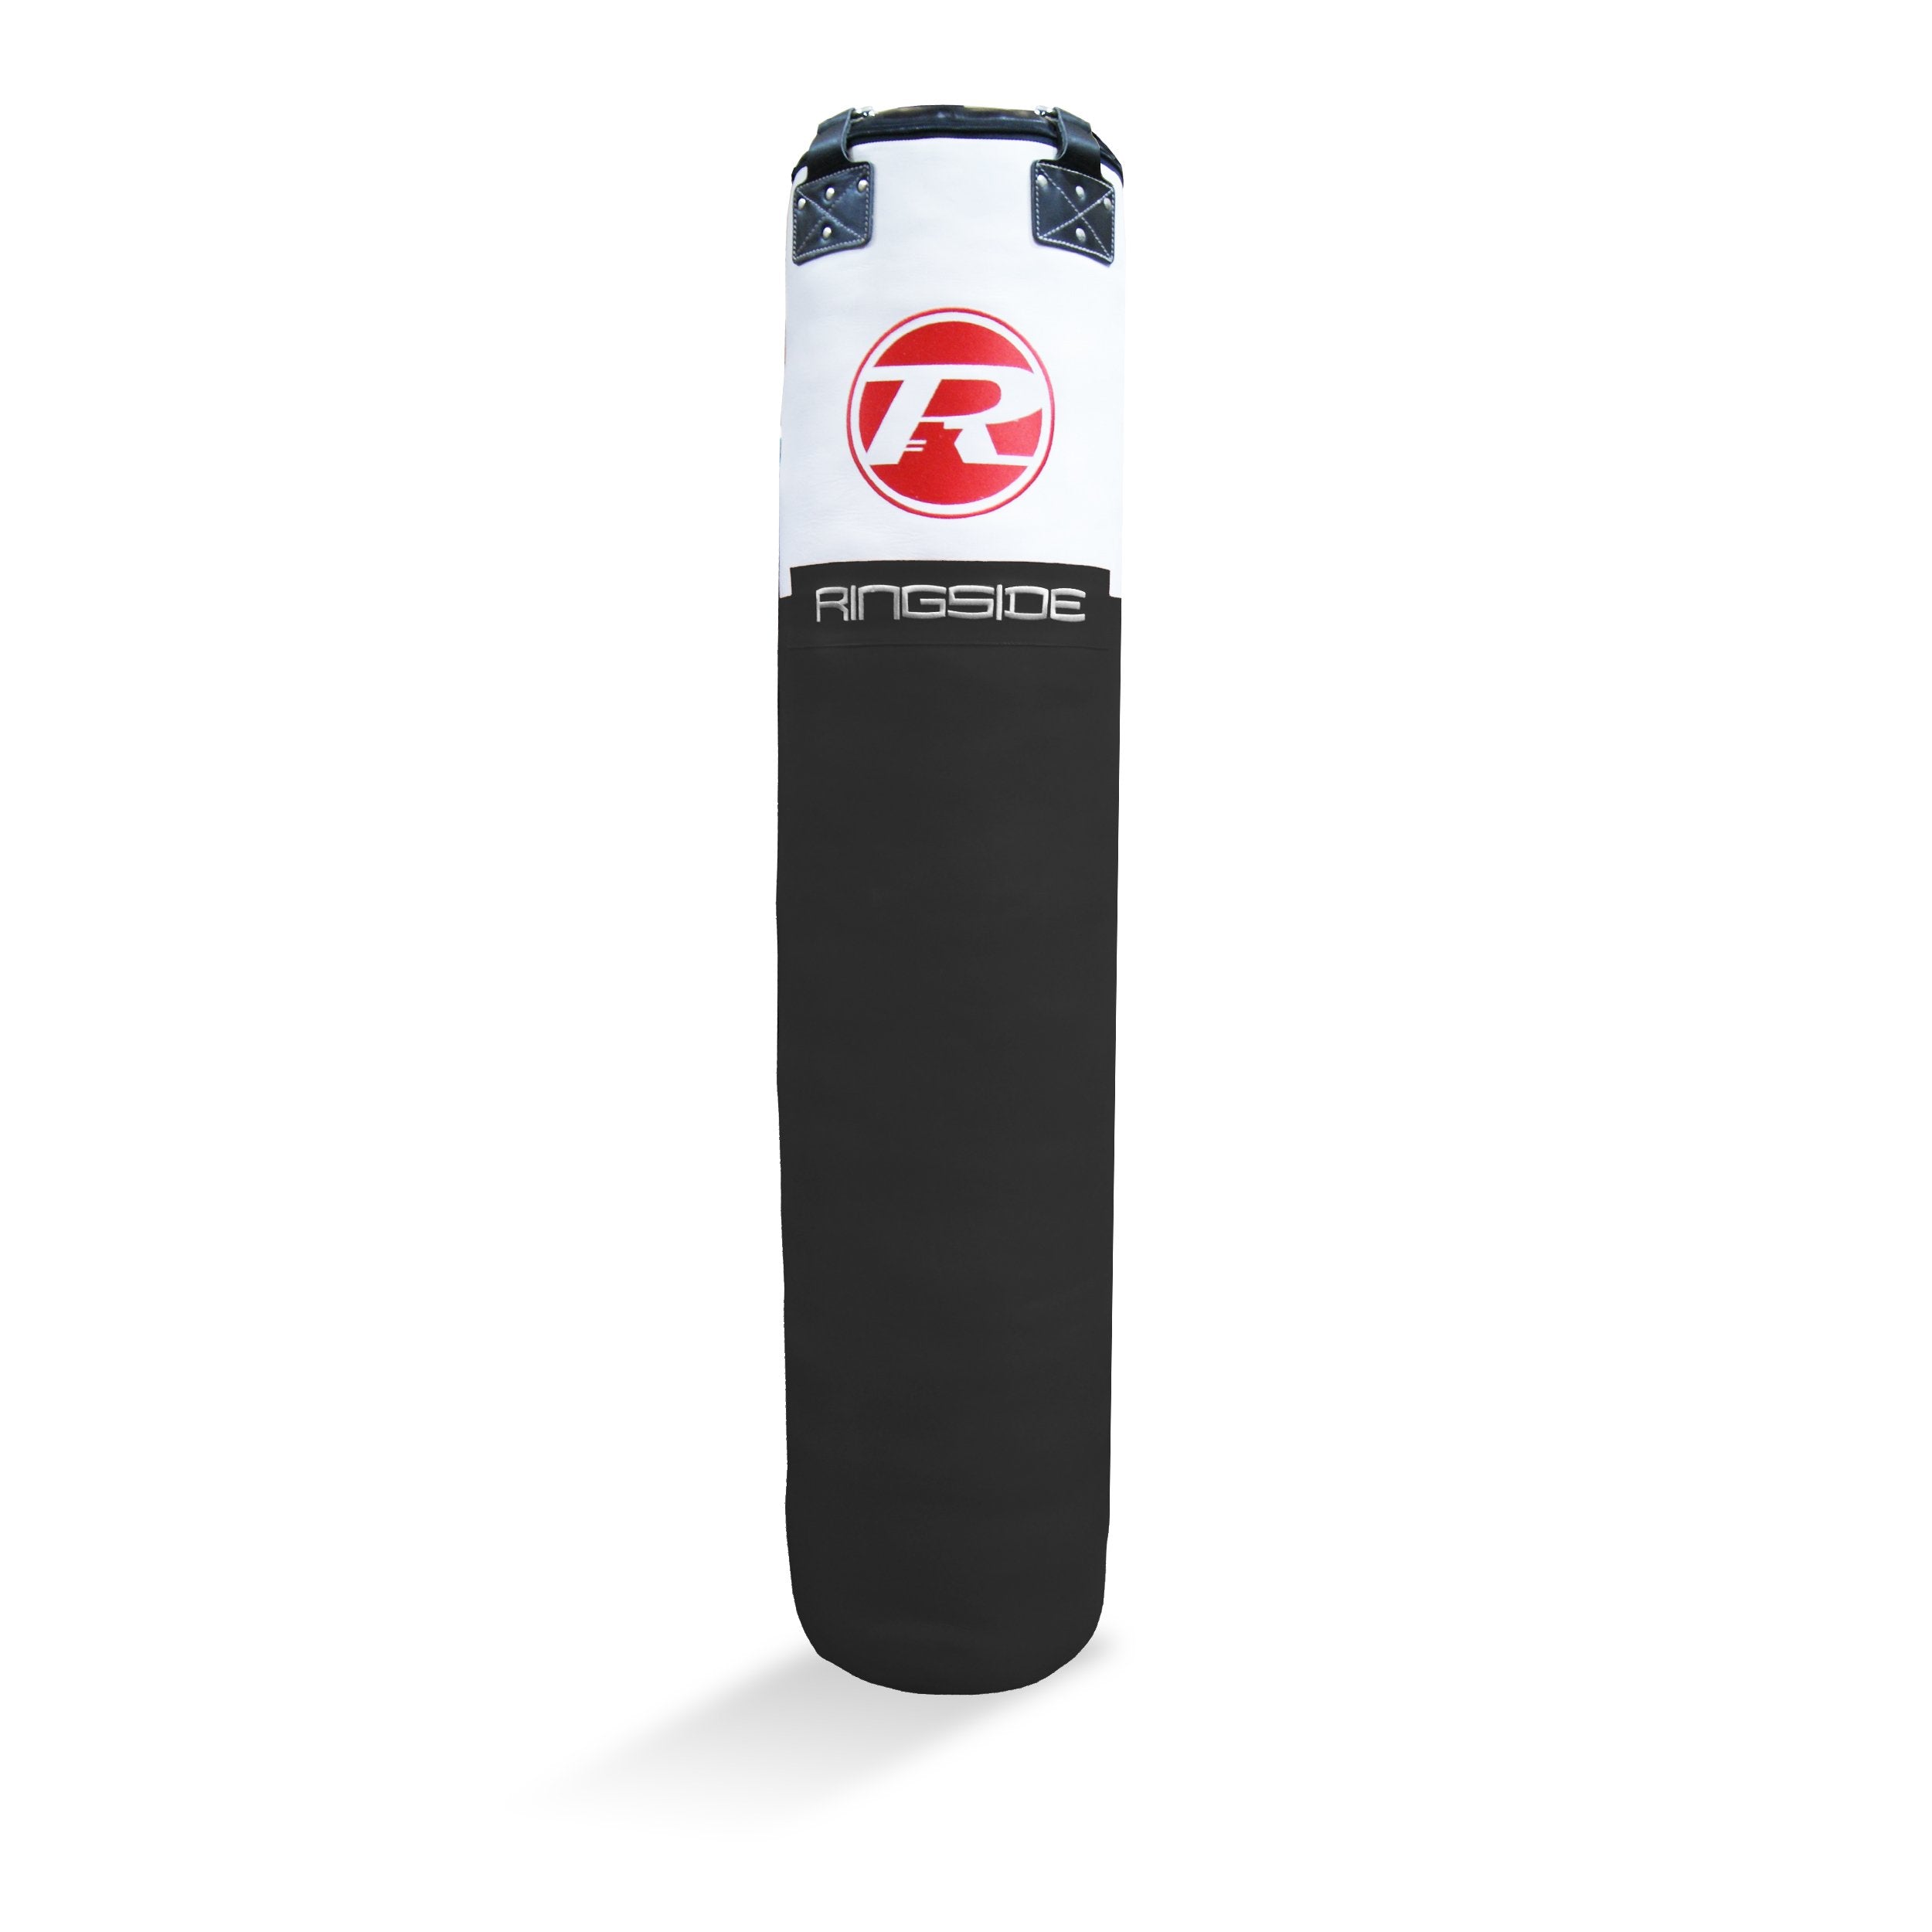 6ft Buffalo Leather Punch Bag - Black / White / Red